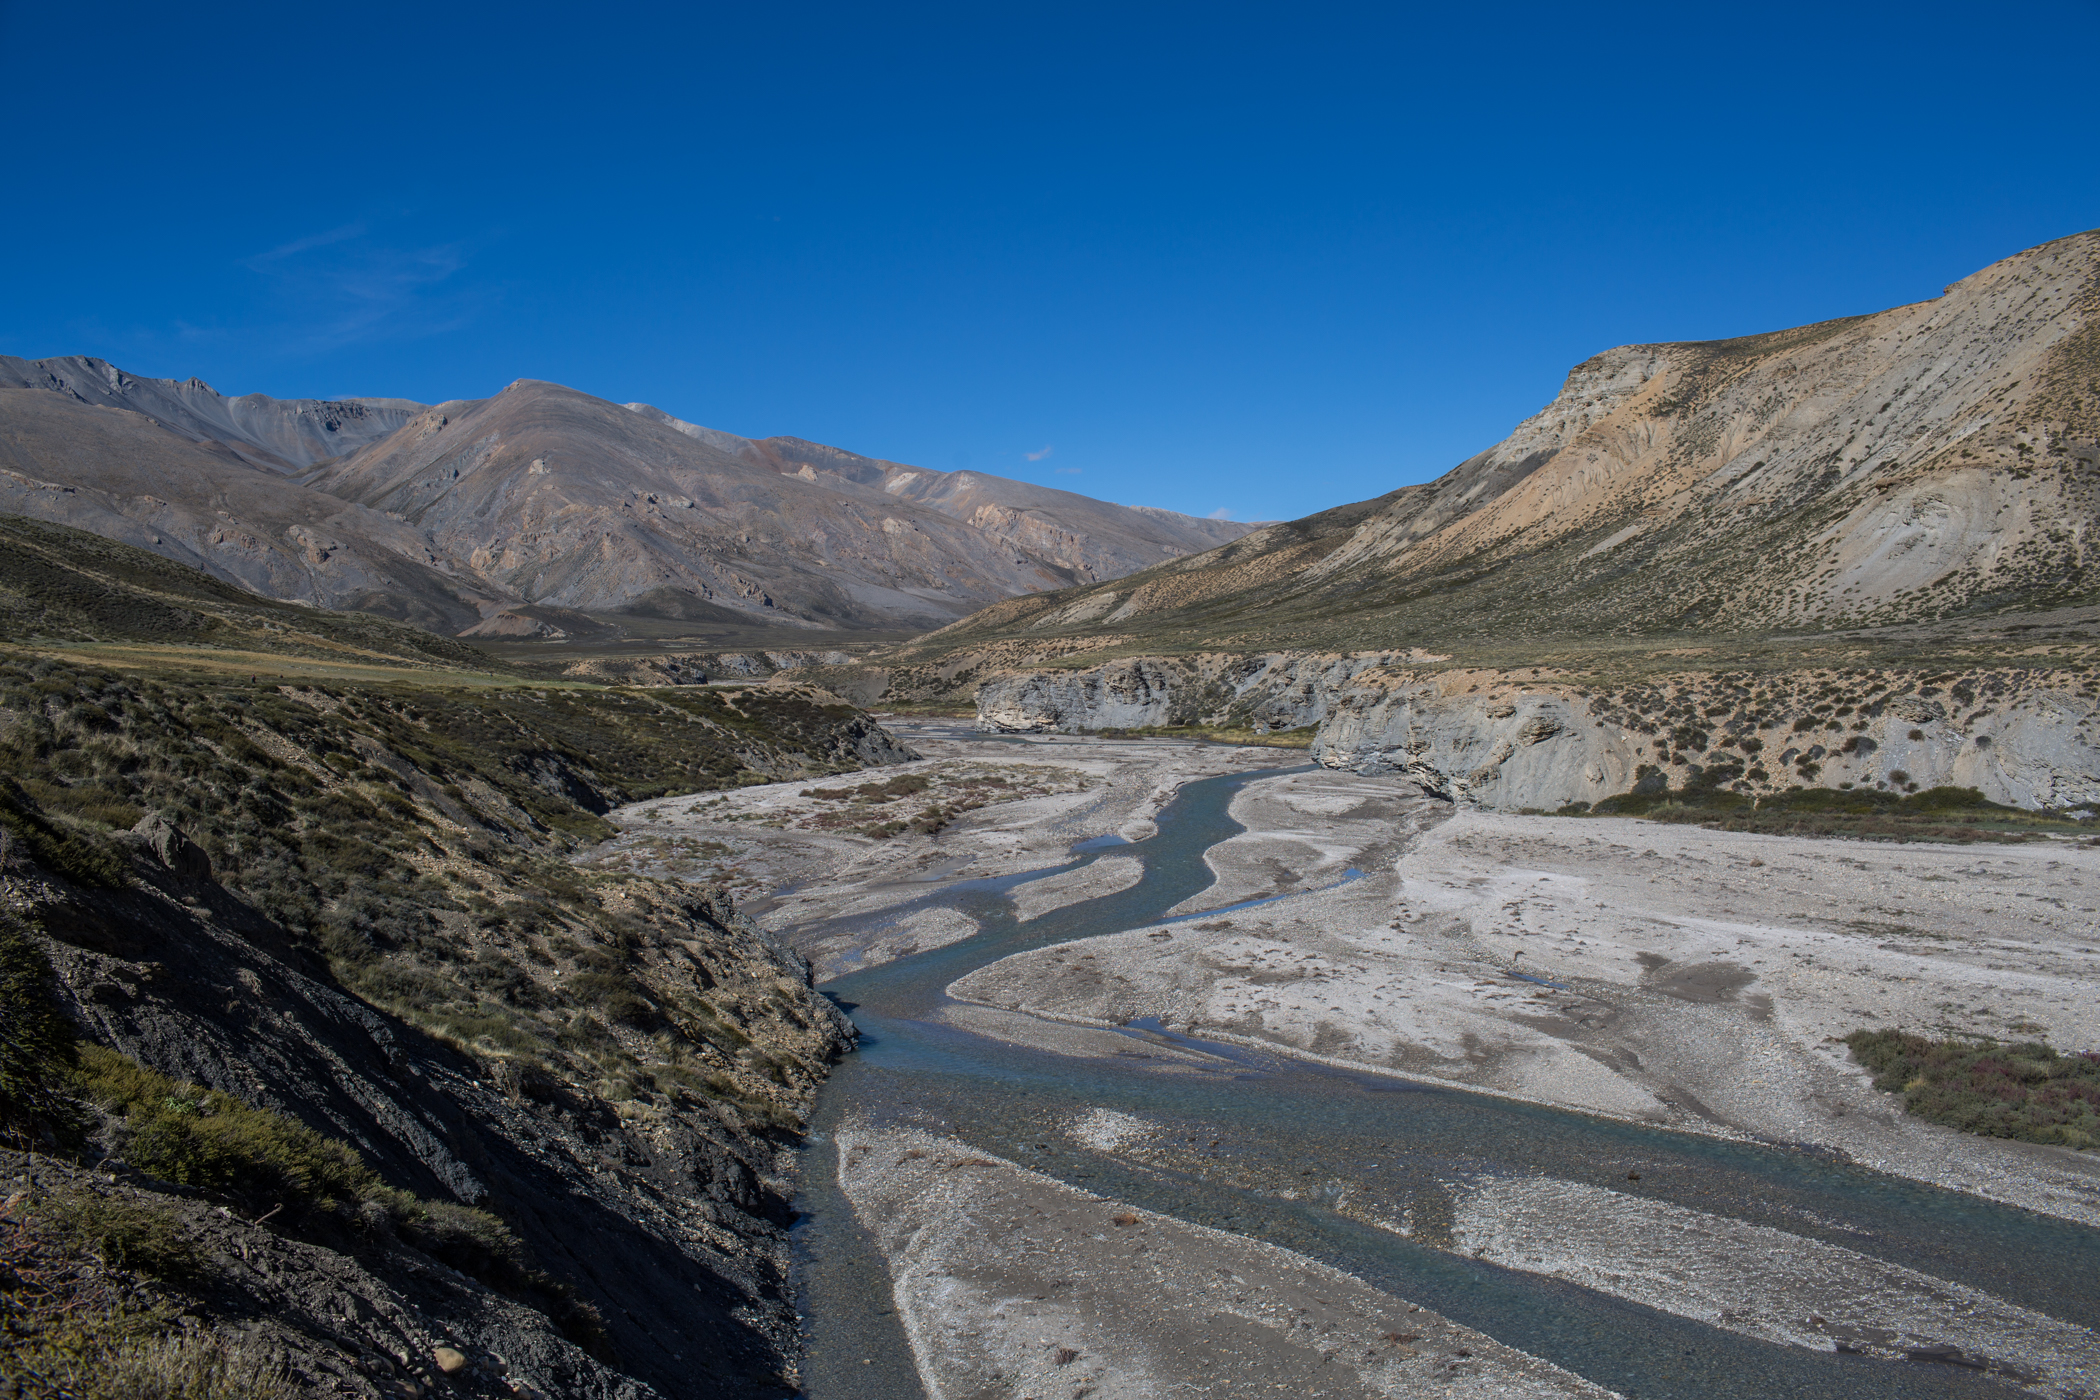 <p>Mapcha Khambab River in Tibet, China. Mapcha Khambab means peacock’s mouth in Tibetan and is named after a spring which is the spiritual source of the river. The river becomes the Karnali in Nepal and the Ghaghara in India [image by: Nabin Baral]</p>